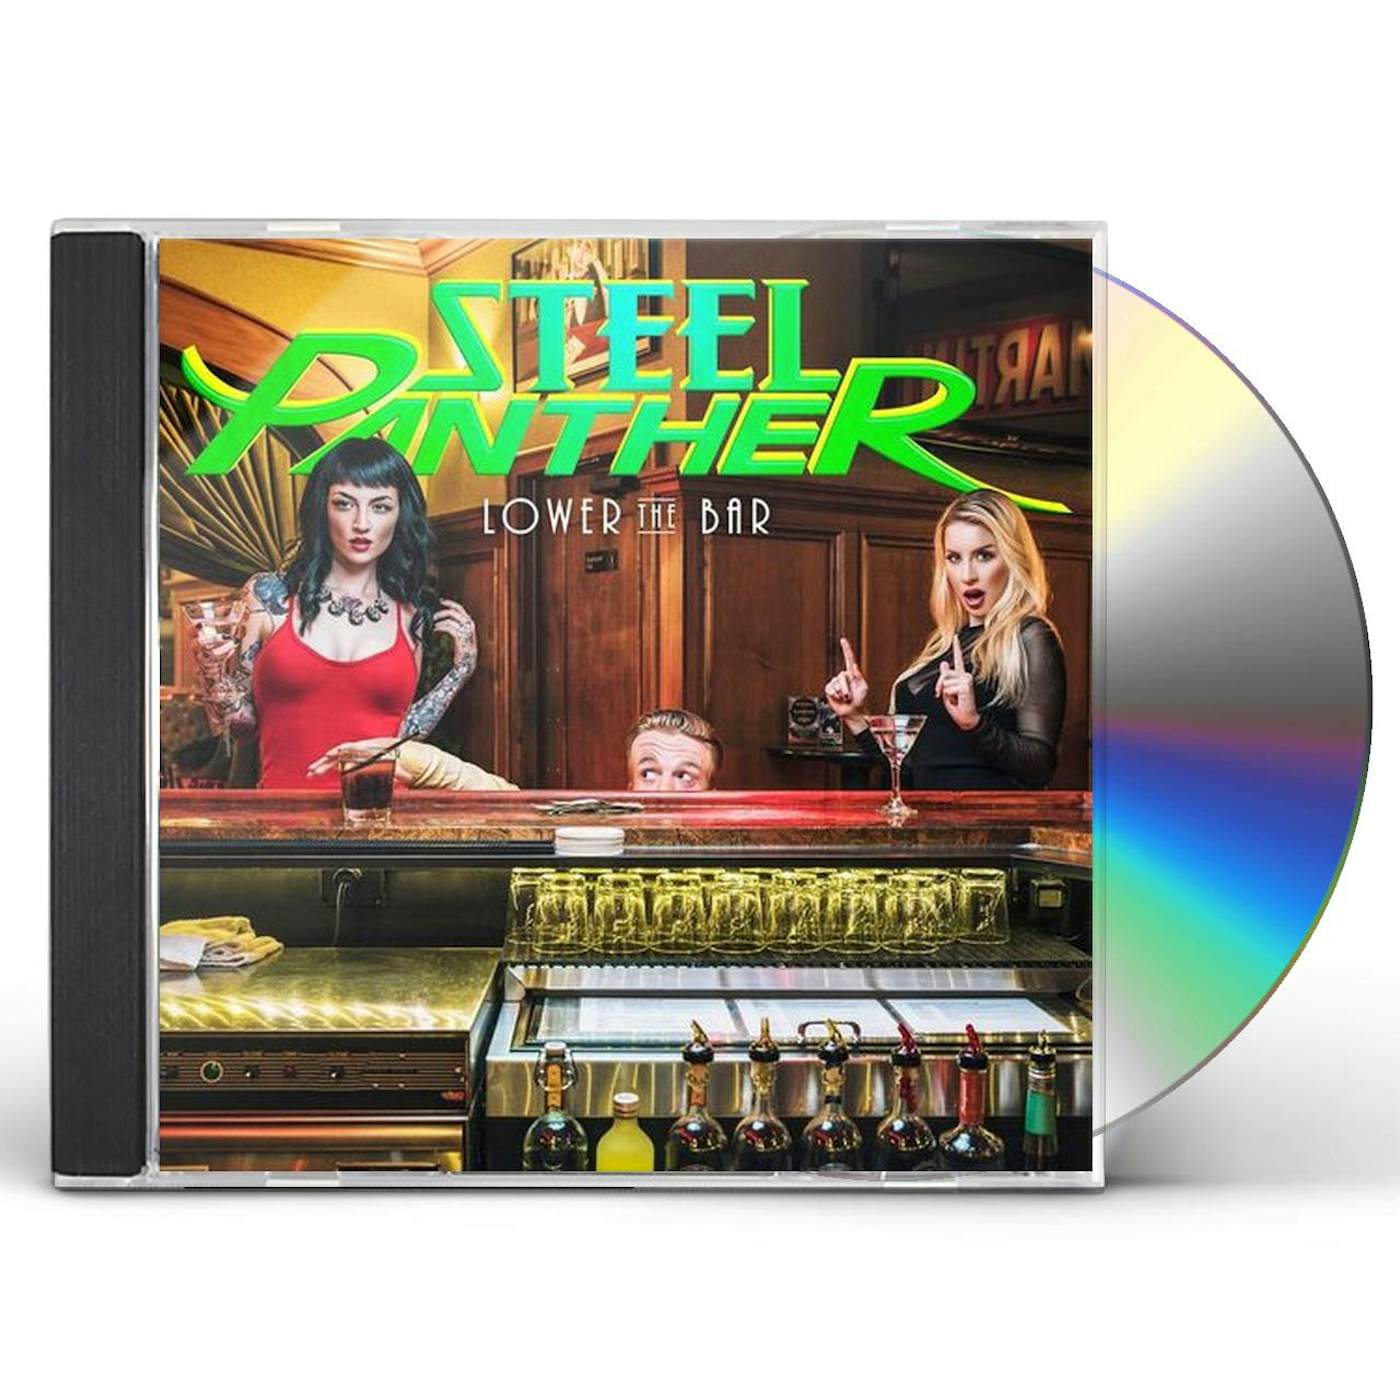 Steel Panther LOWER THE BAR (DELUXE EDITION) CD